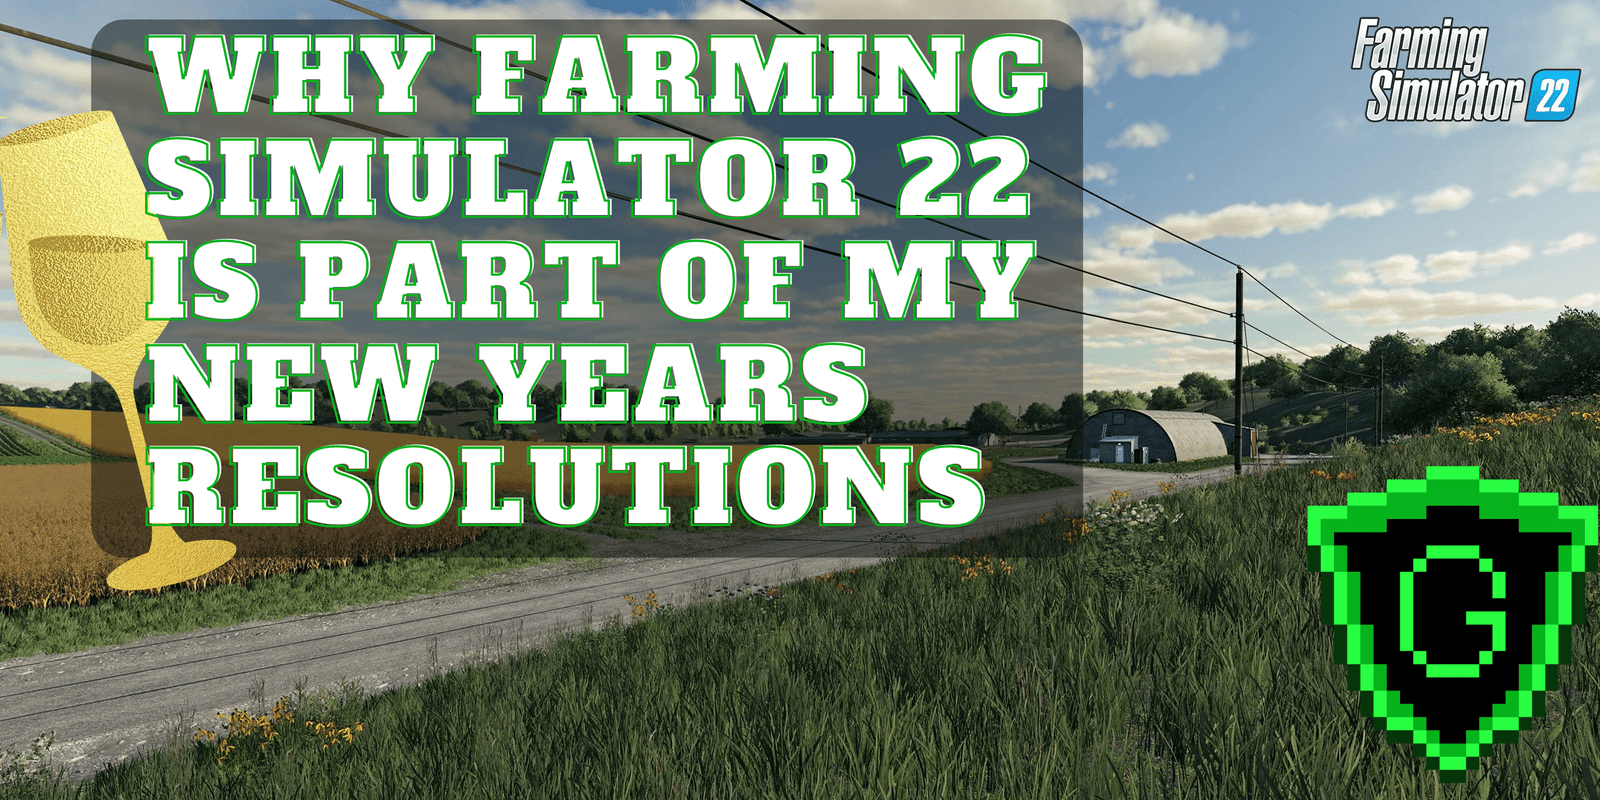 Why farming simulator 22 is part of my new years resolutions